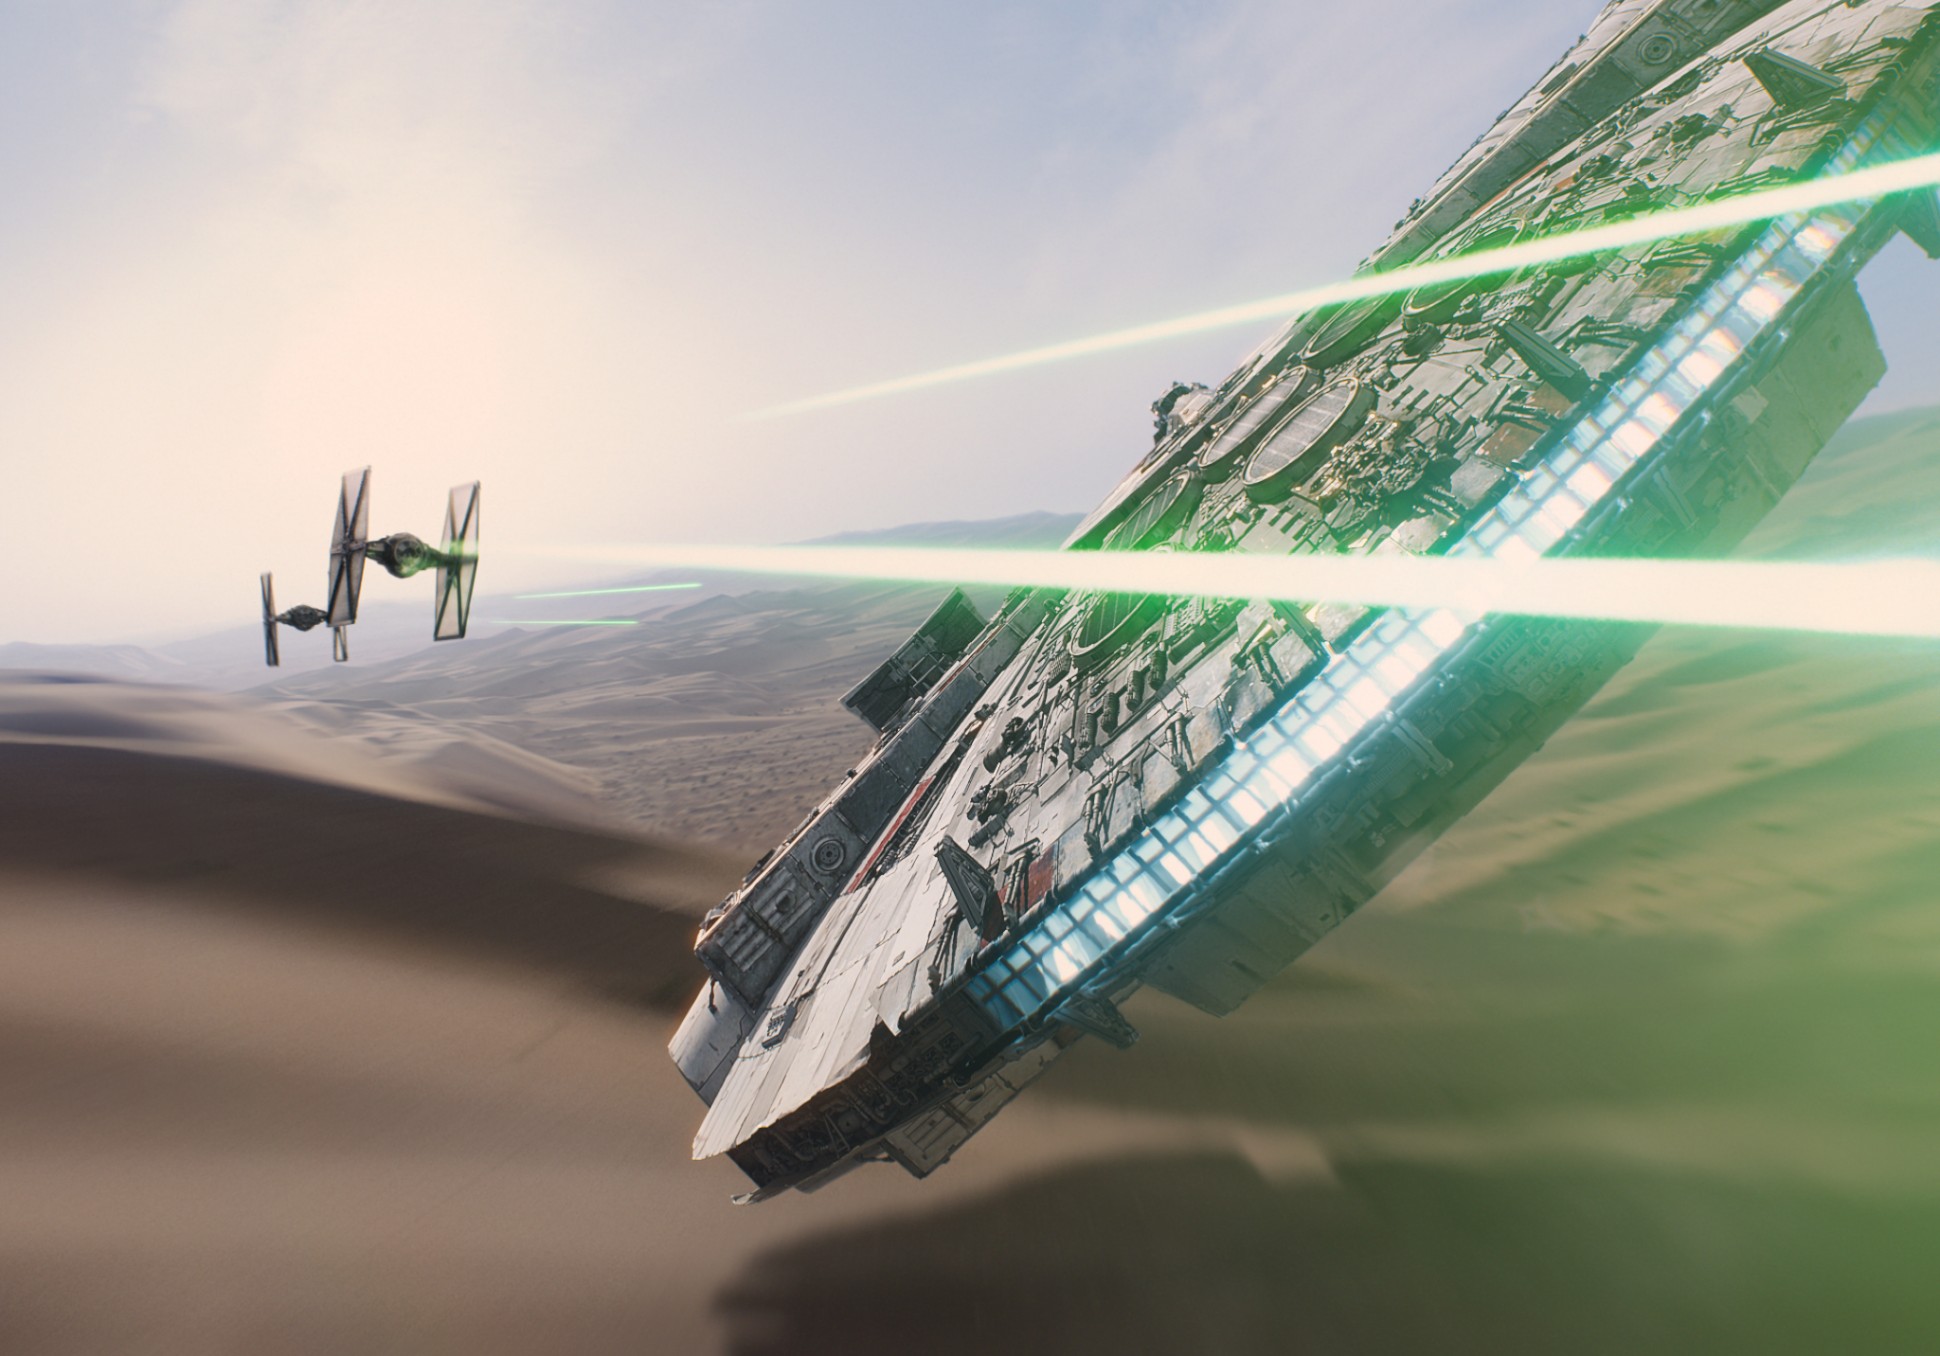 How Star Wars: The Force Awakens Will be Different in IMAX